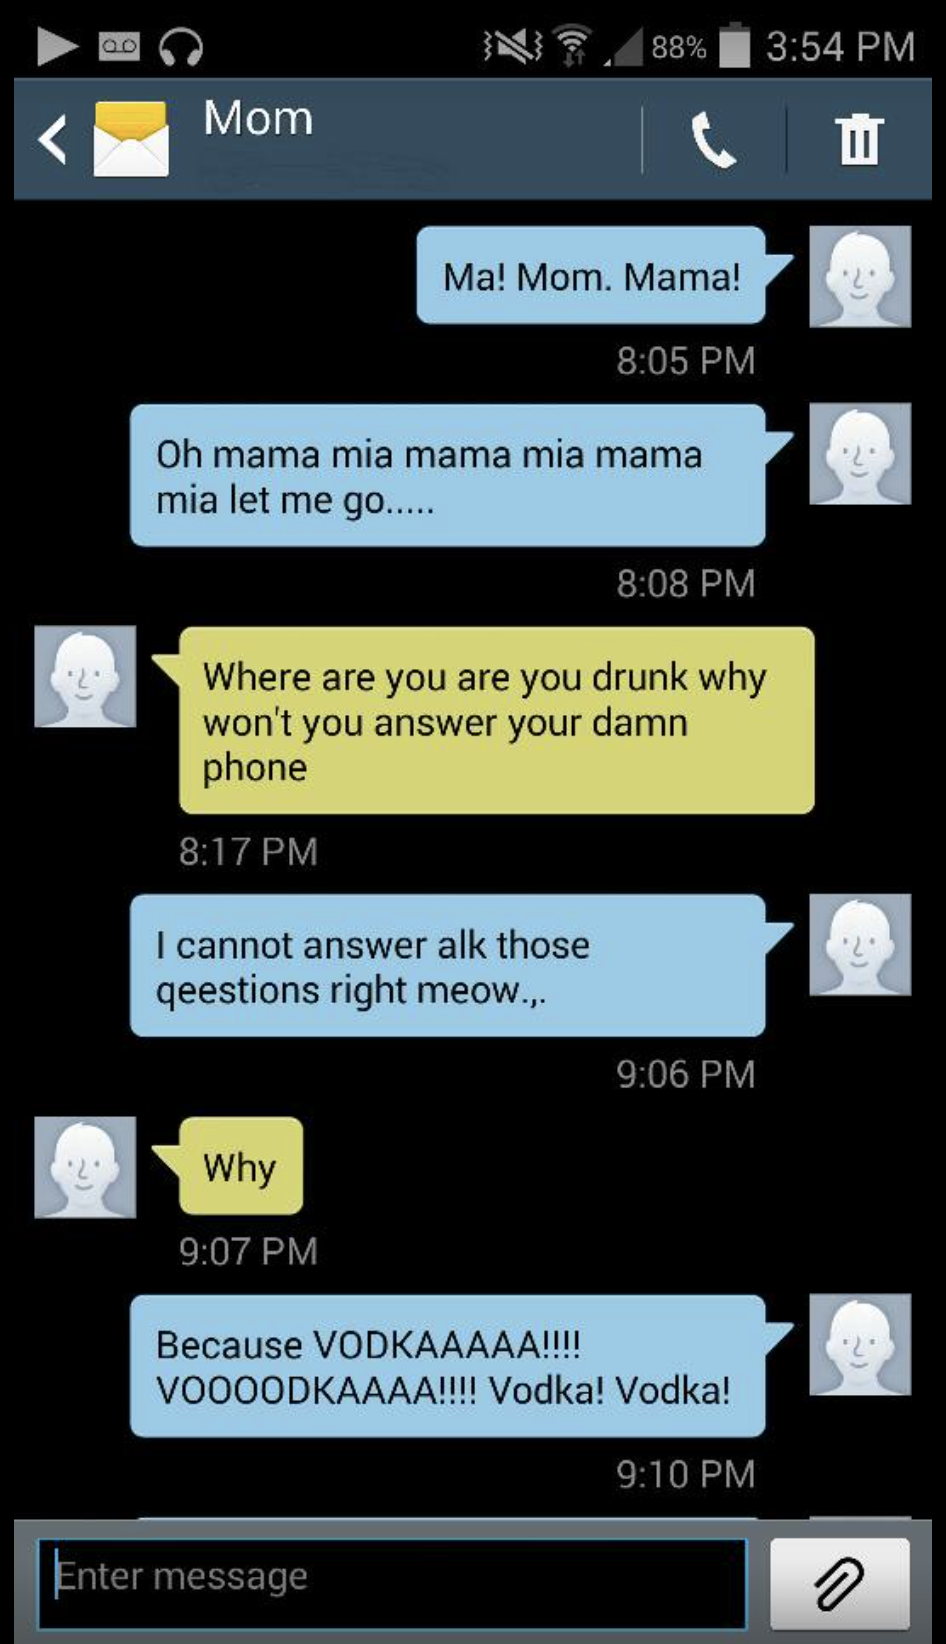 mother daughter texts elizabeth - N 88% Mom Ma! Mom. Mama! Oh mama mia mama mia mama mia let me go..... Where are you are you drunk why won't you answer your damn phone I cannot answer alk those geestions right meow... Why Because Vodkaaaaa!!!! Voooodkaaa